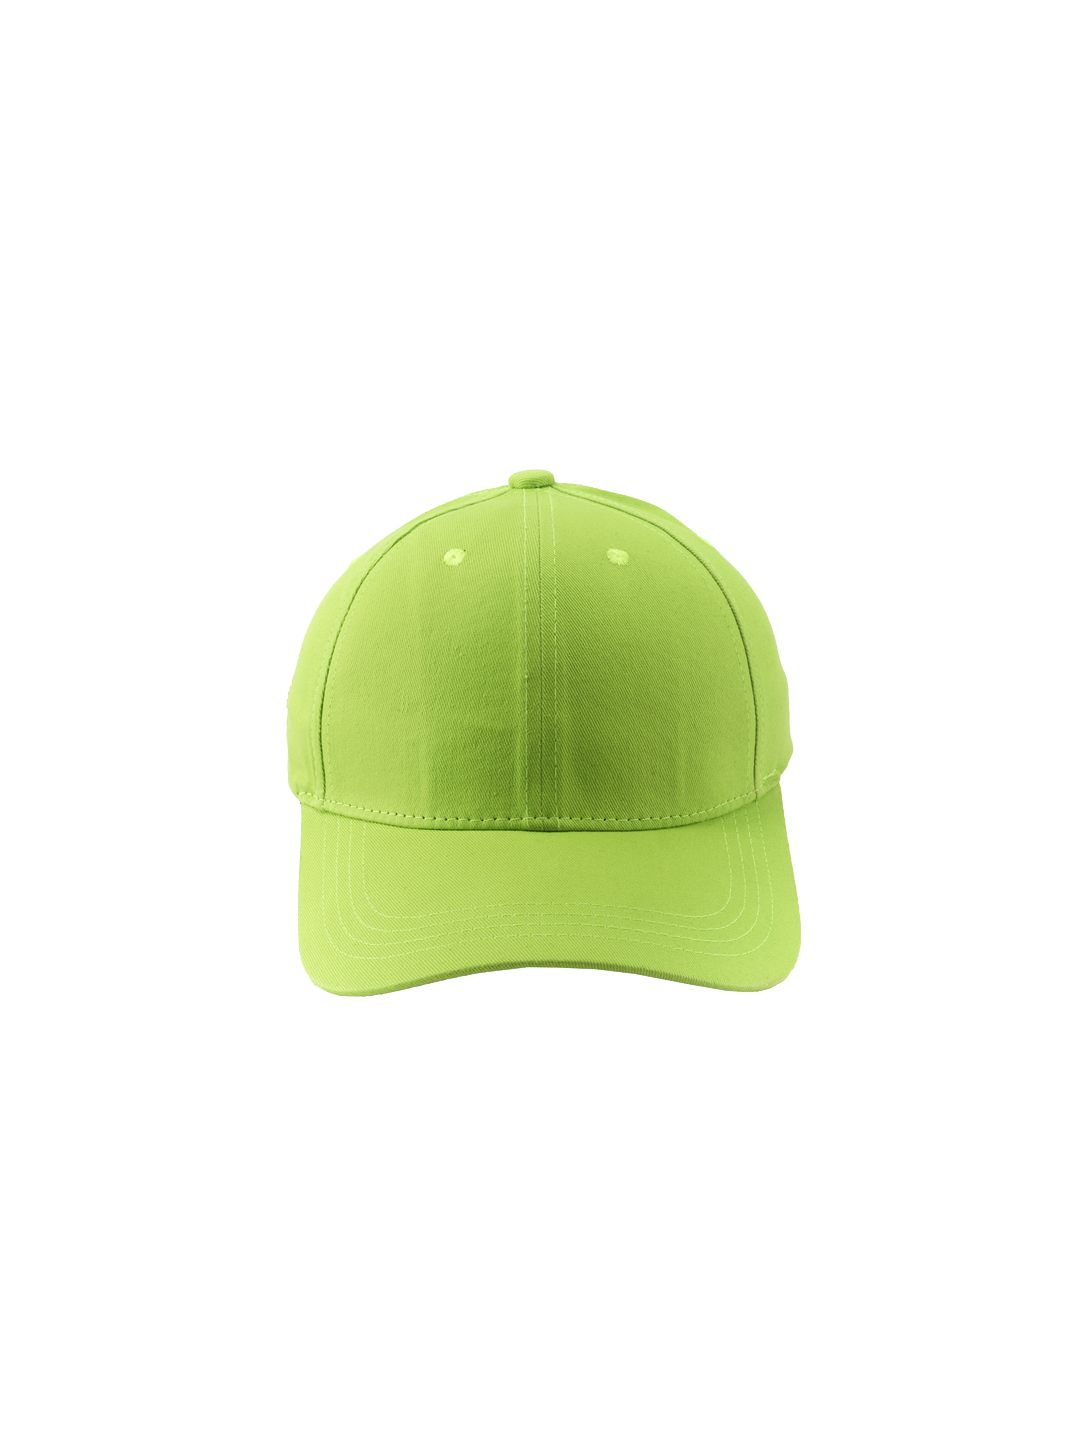 Cap Shap Unisex Lime Green Solid Baseball Cap Price in India